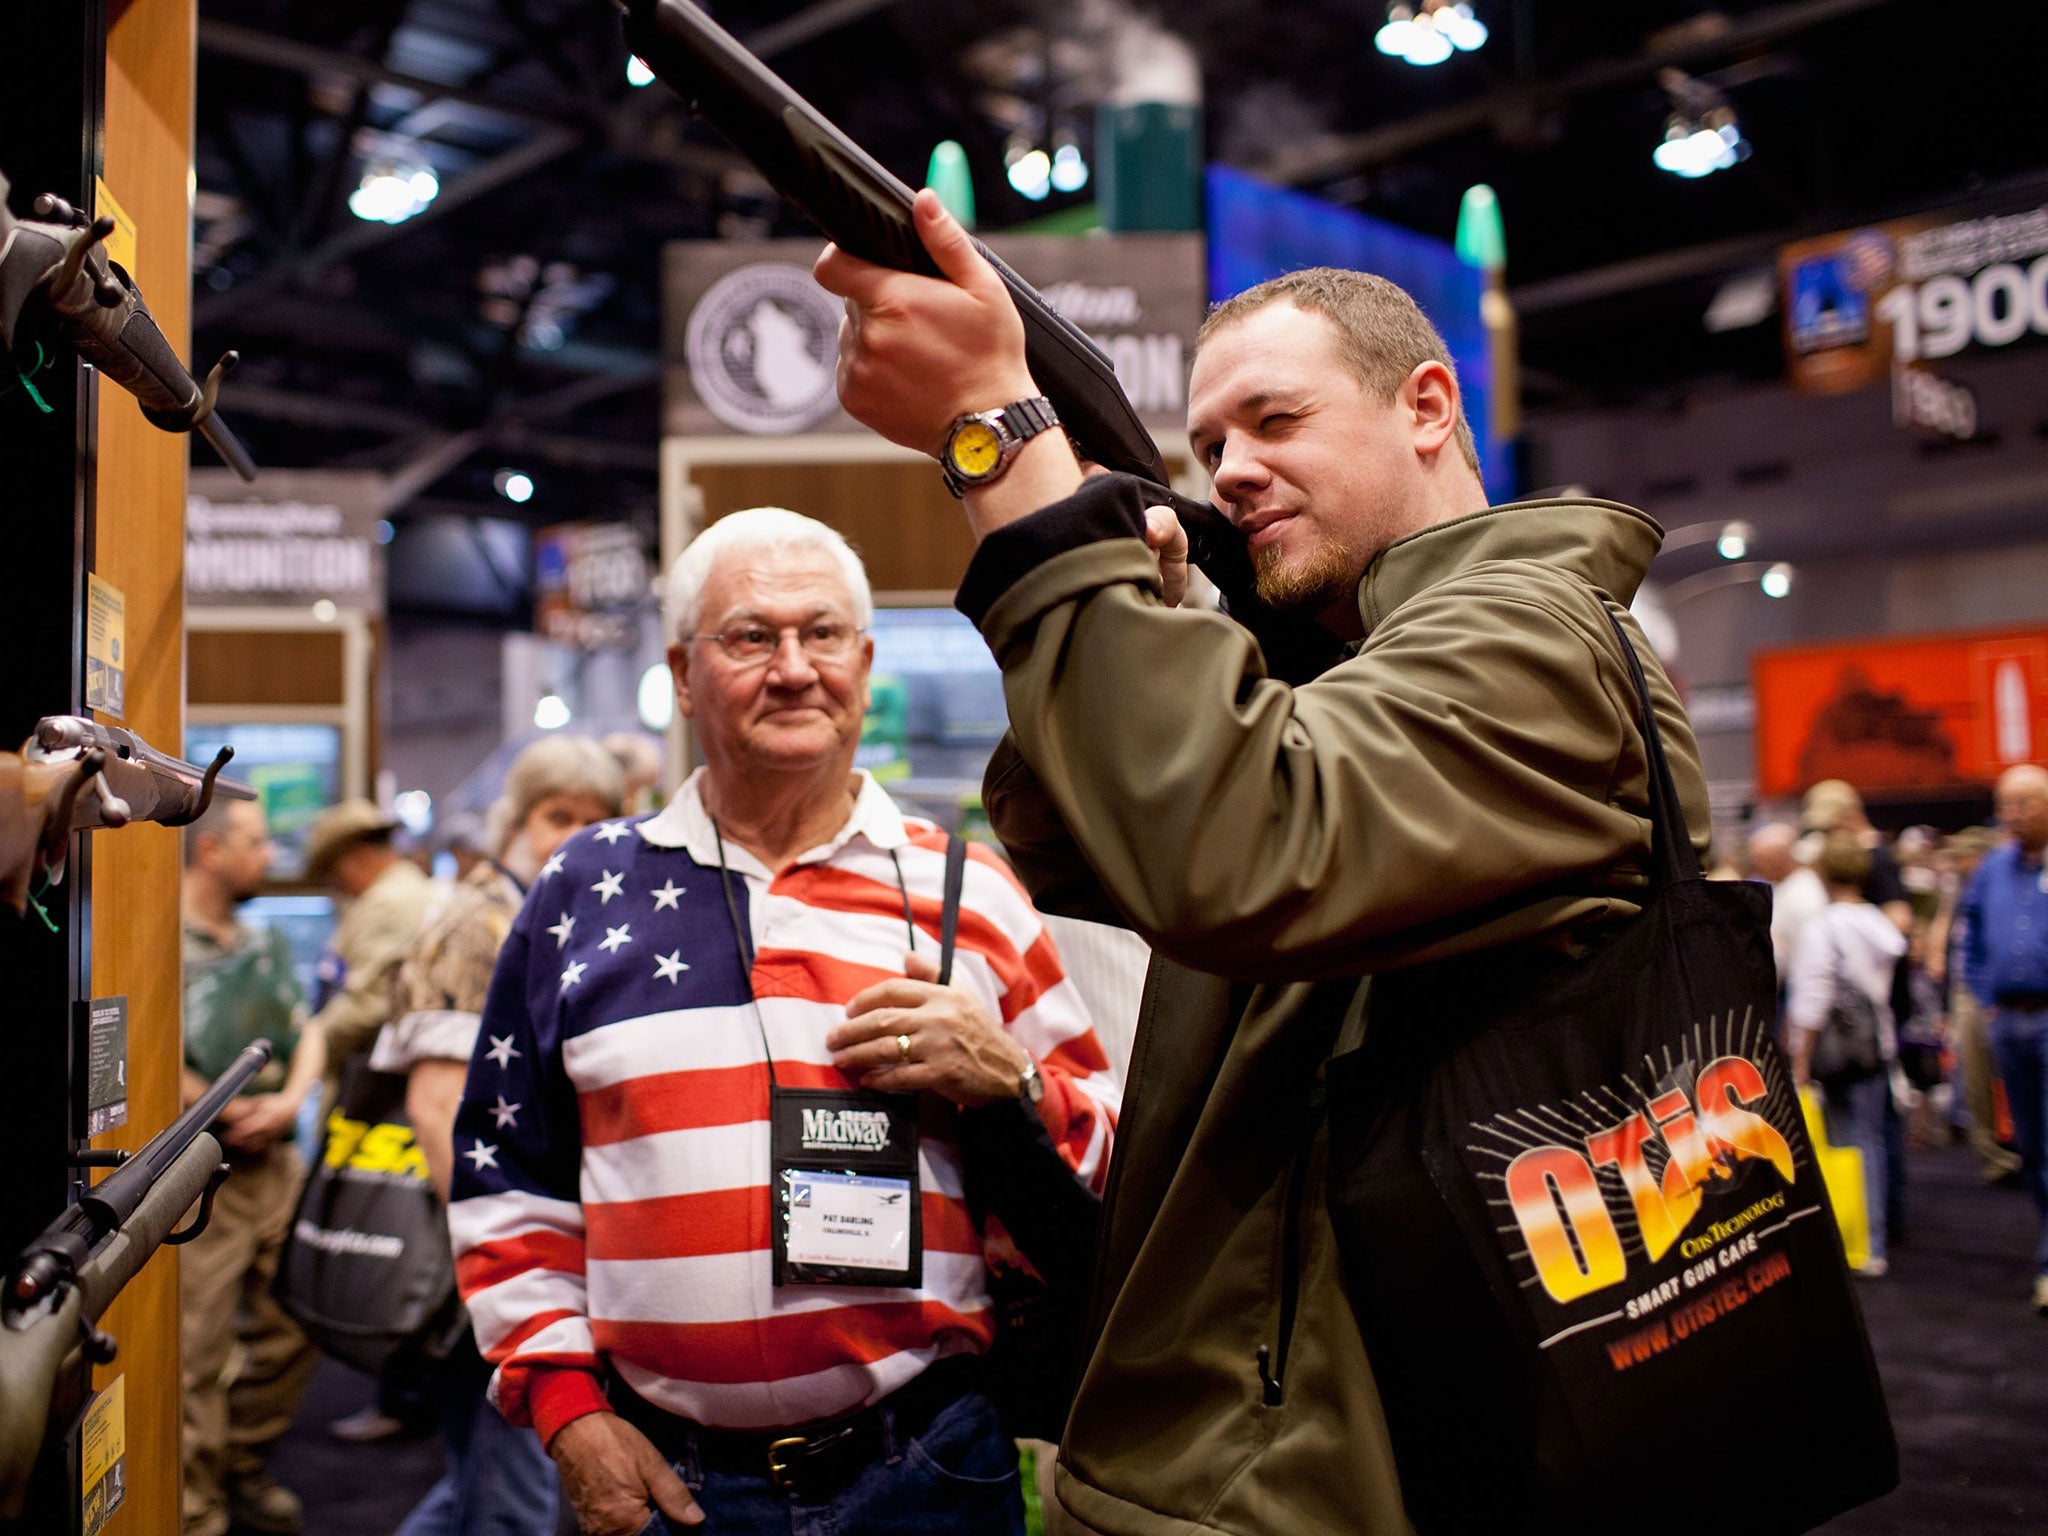 Sure shots: Testing the latest weaponry at a National Rifle Association fair